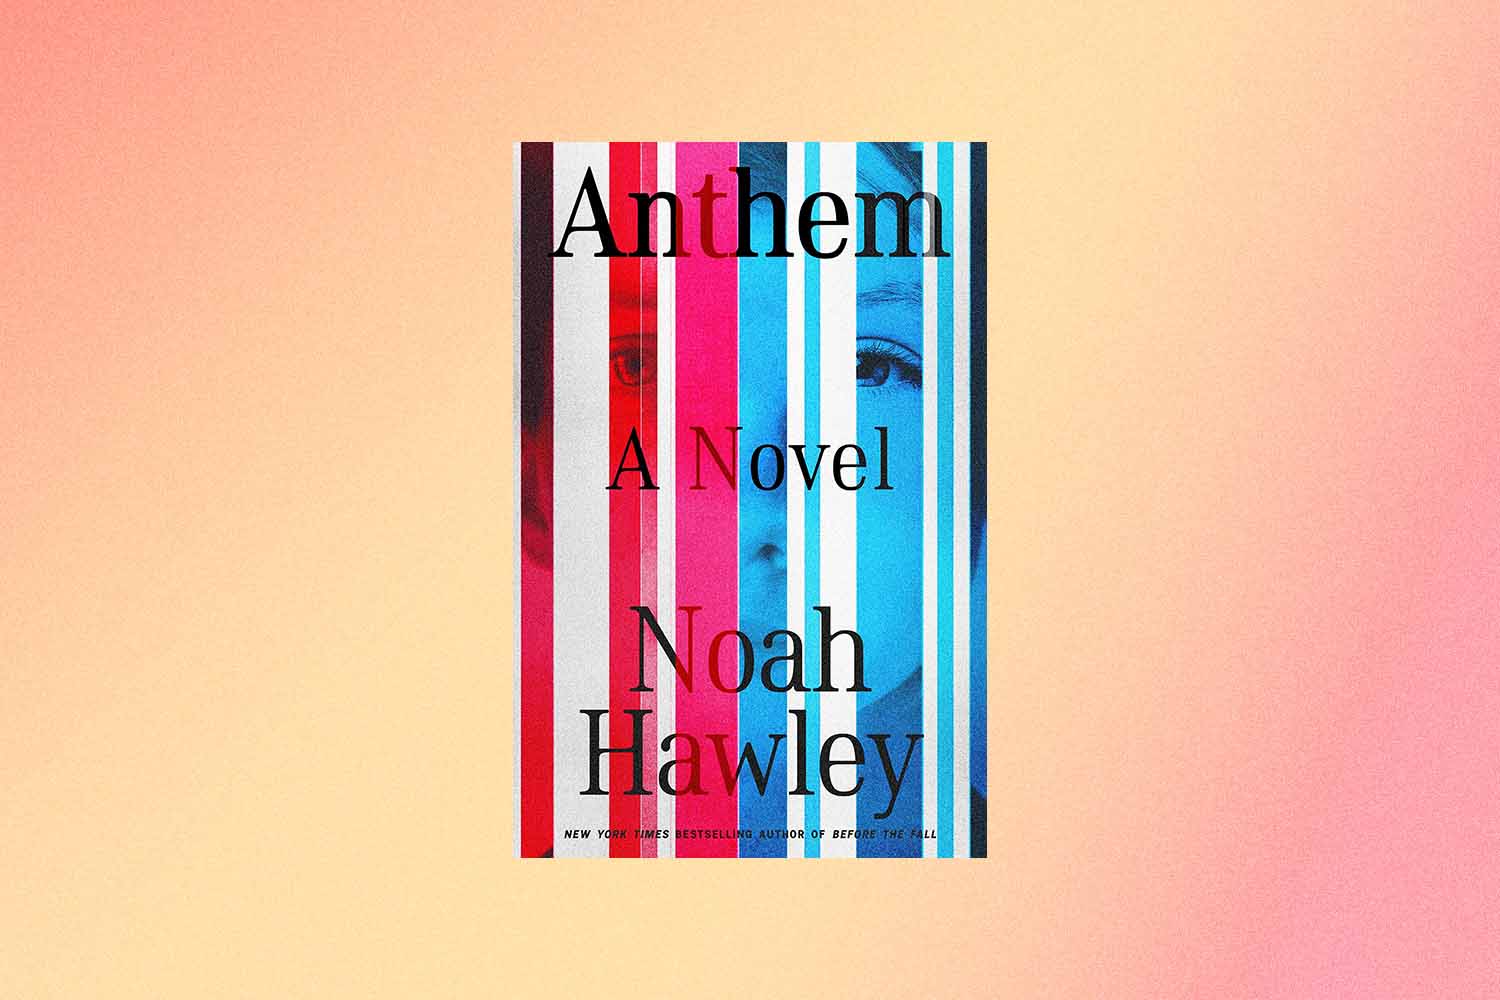 Anthem book cover by Noah Hawley